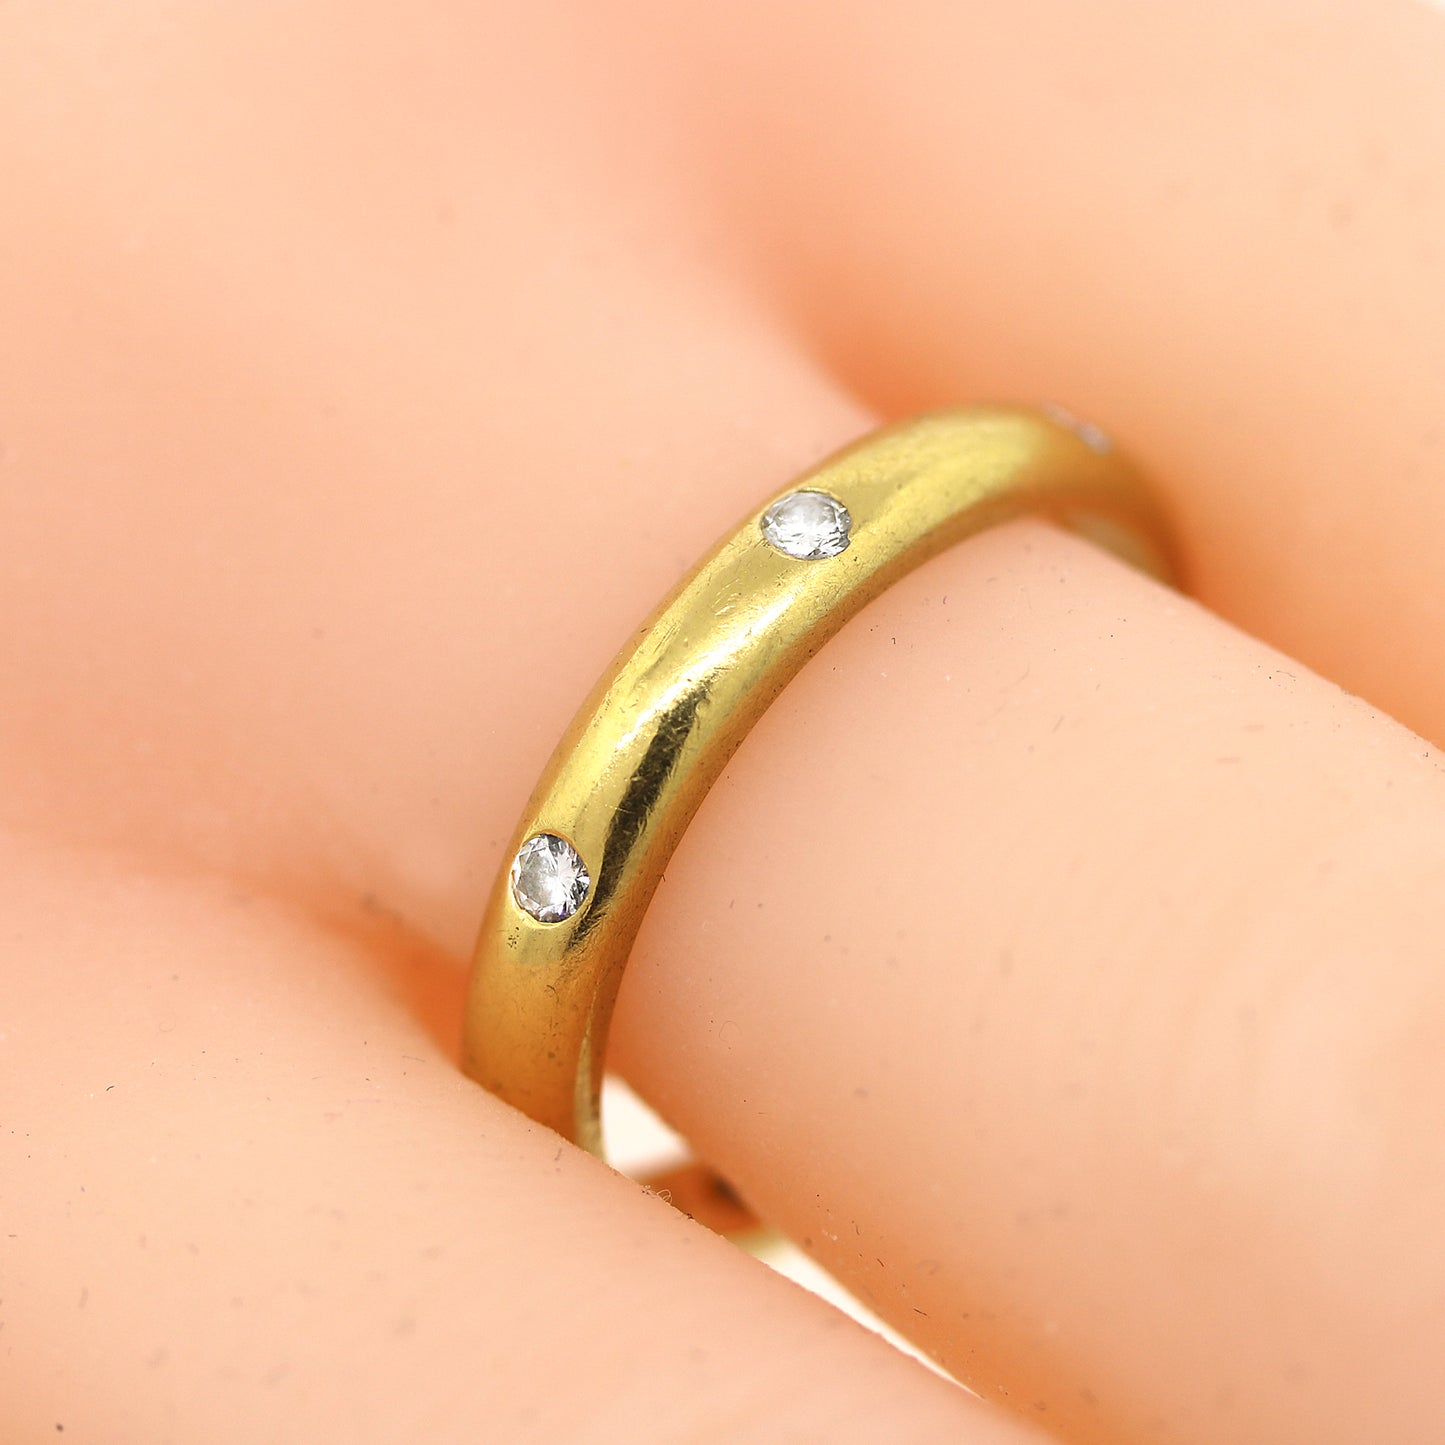 Etoile-Style Diamond Stackable Ring in 18k Gold